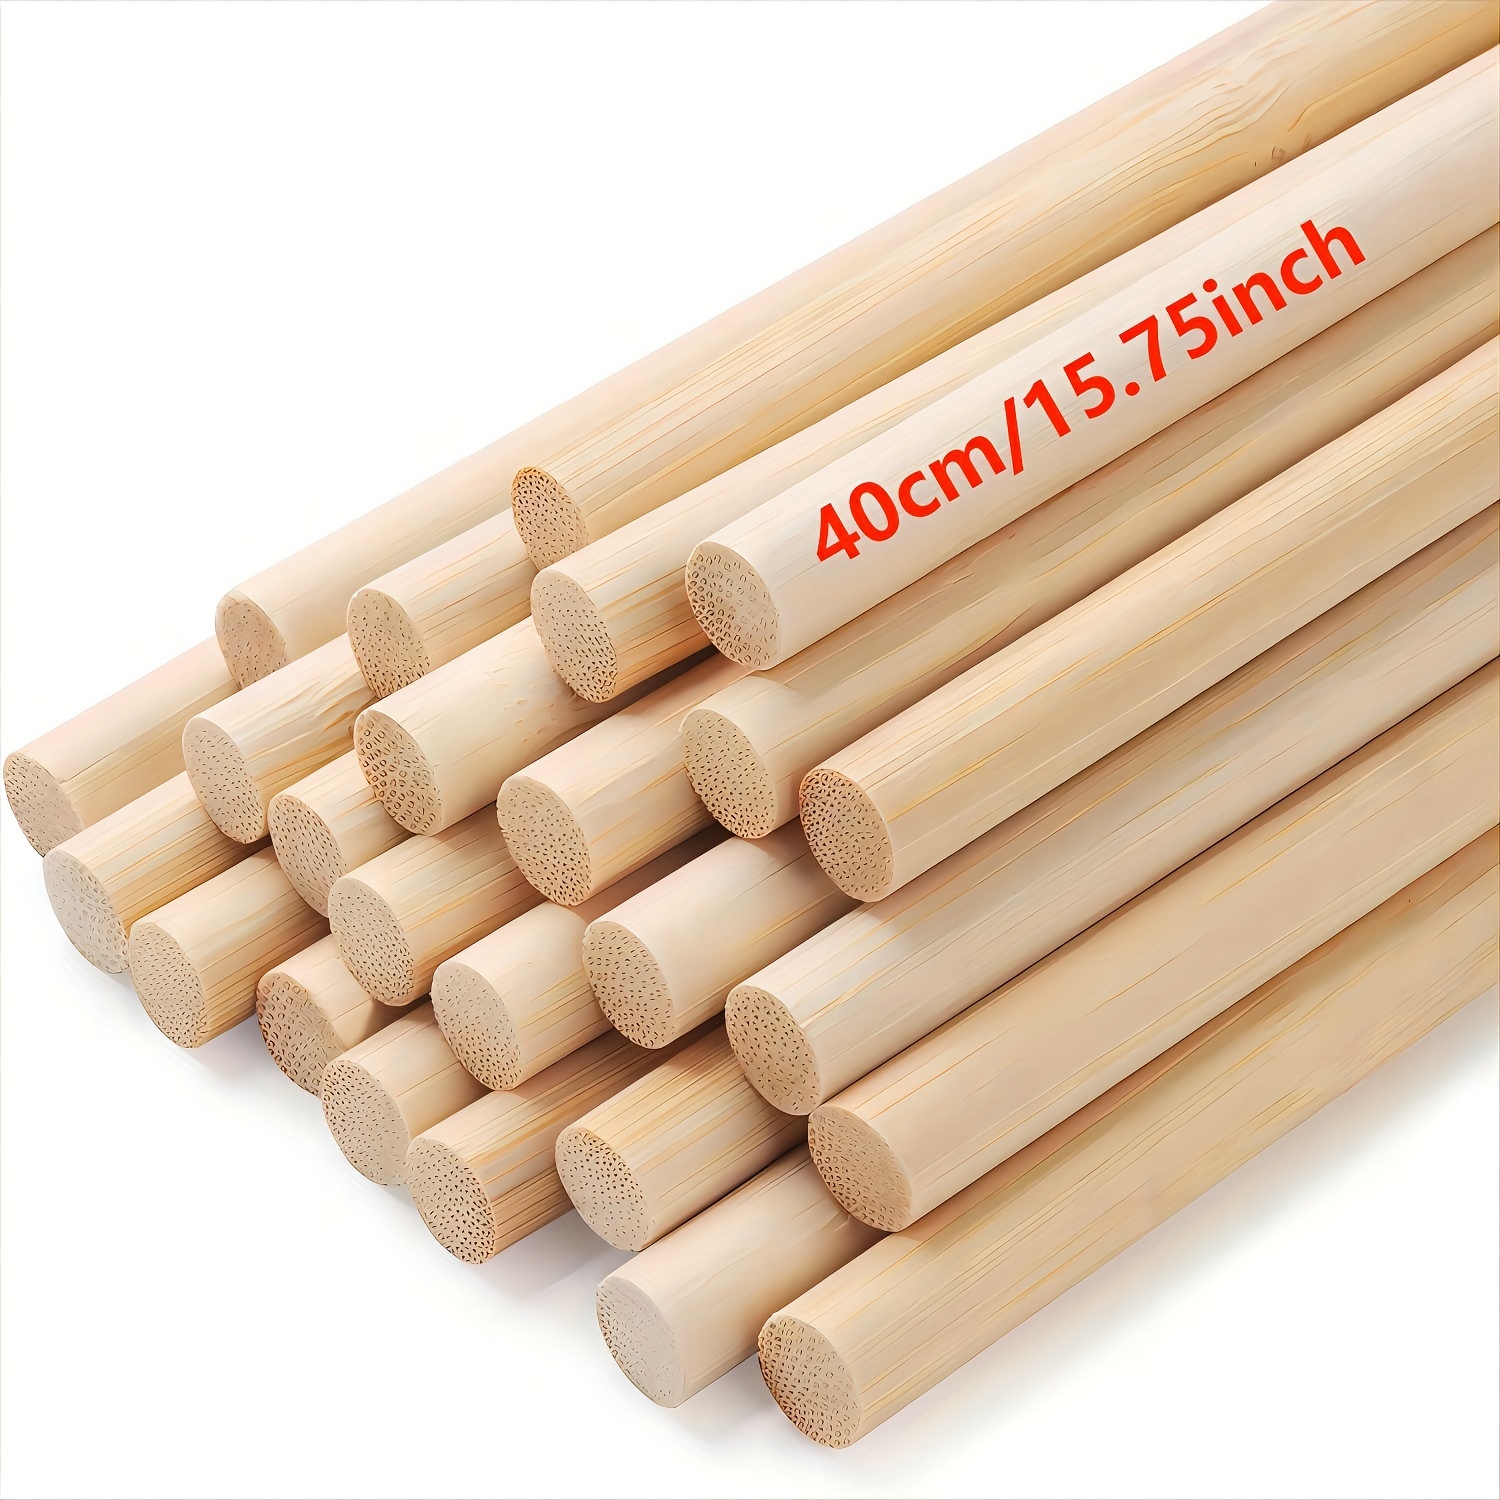 Wood Sticks for Crafting,Unfinished Natural Hardwood Sticks,Wooden Craft  Sticks,Arts Sticks for Crafts and Diyers